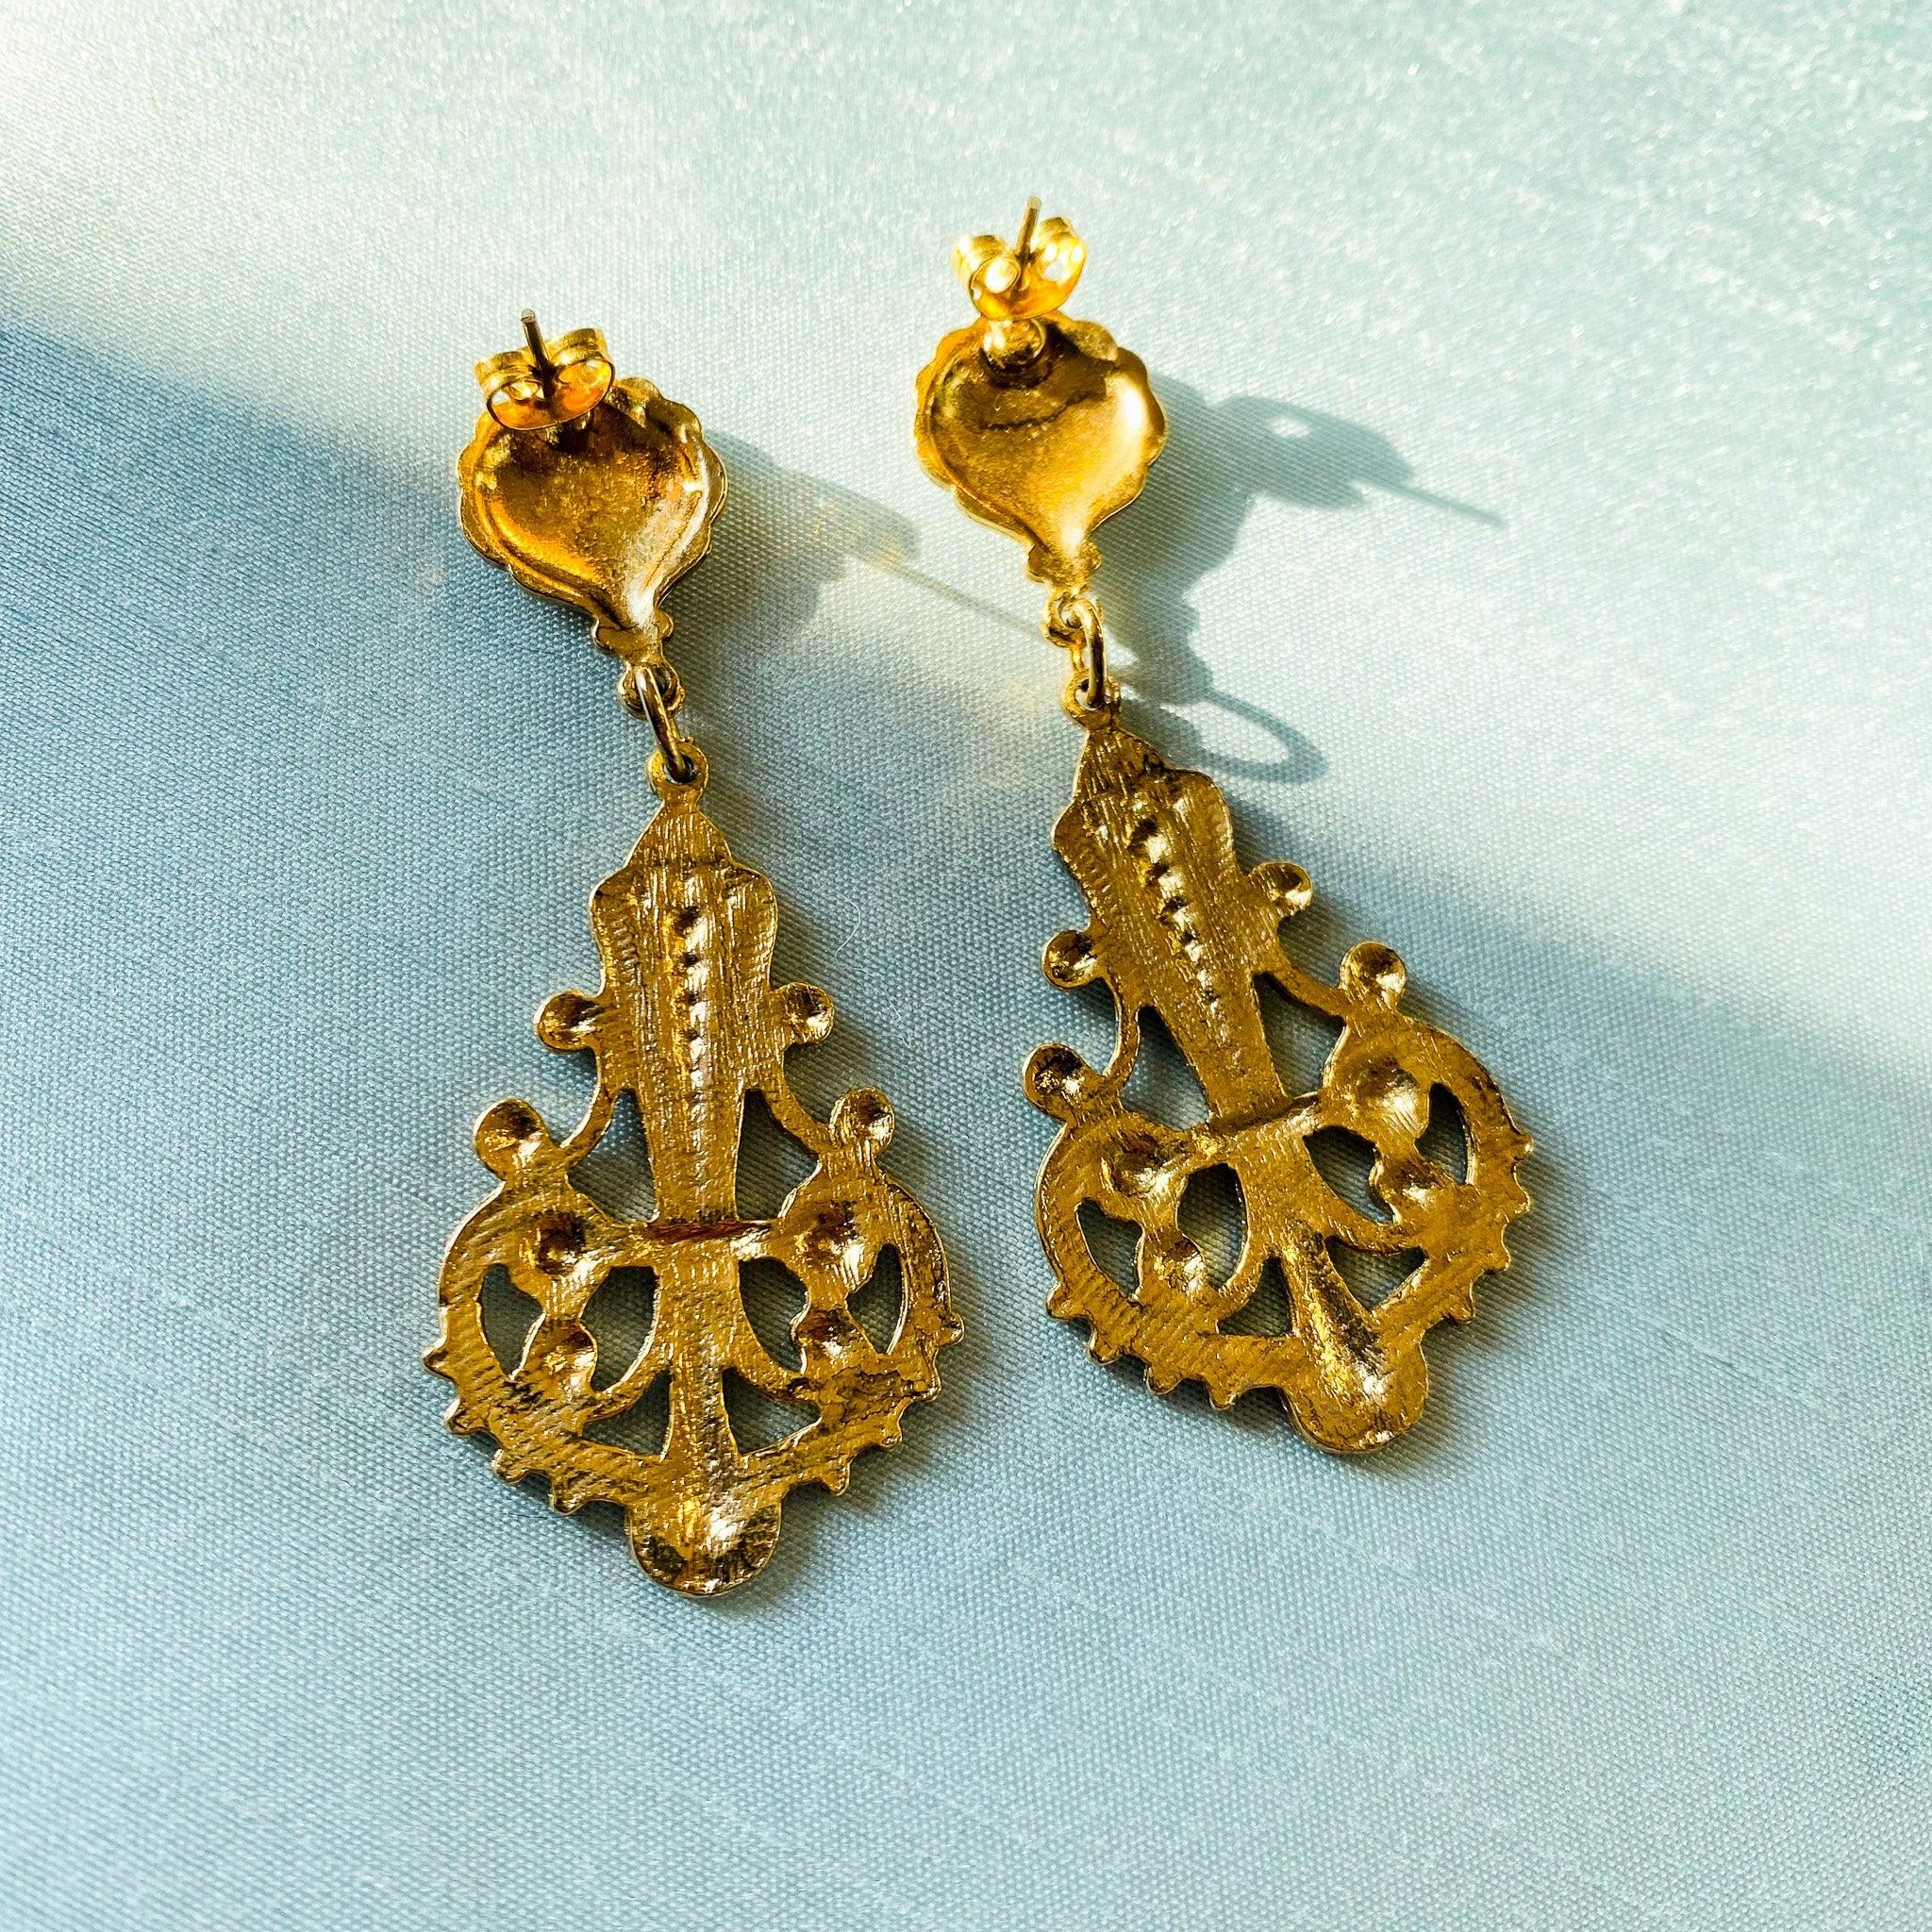 Vintage 1980s Earrings for Pierced Ears - 18 Carat Gold Plated Vintage Deadstock In New Condition For Sale In London, GB